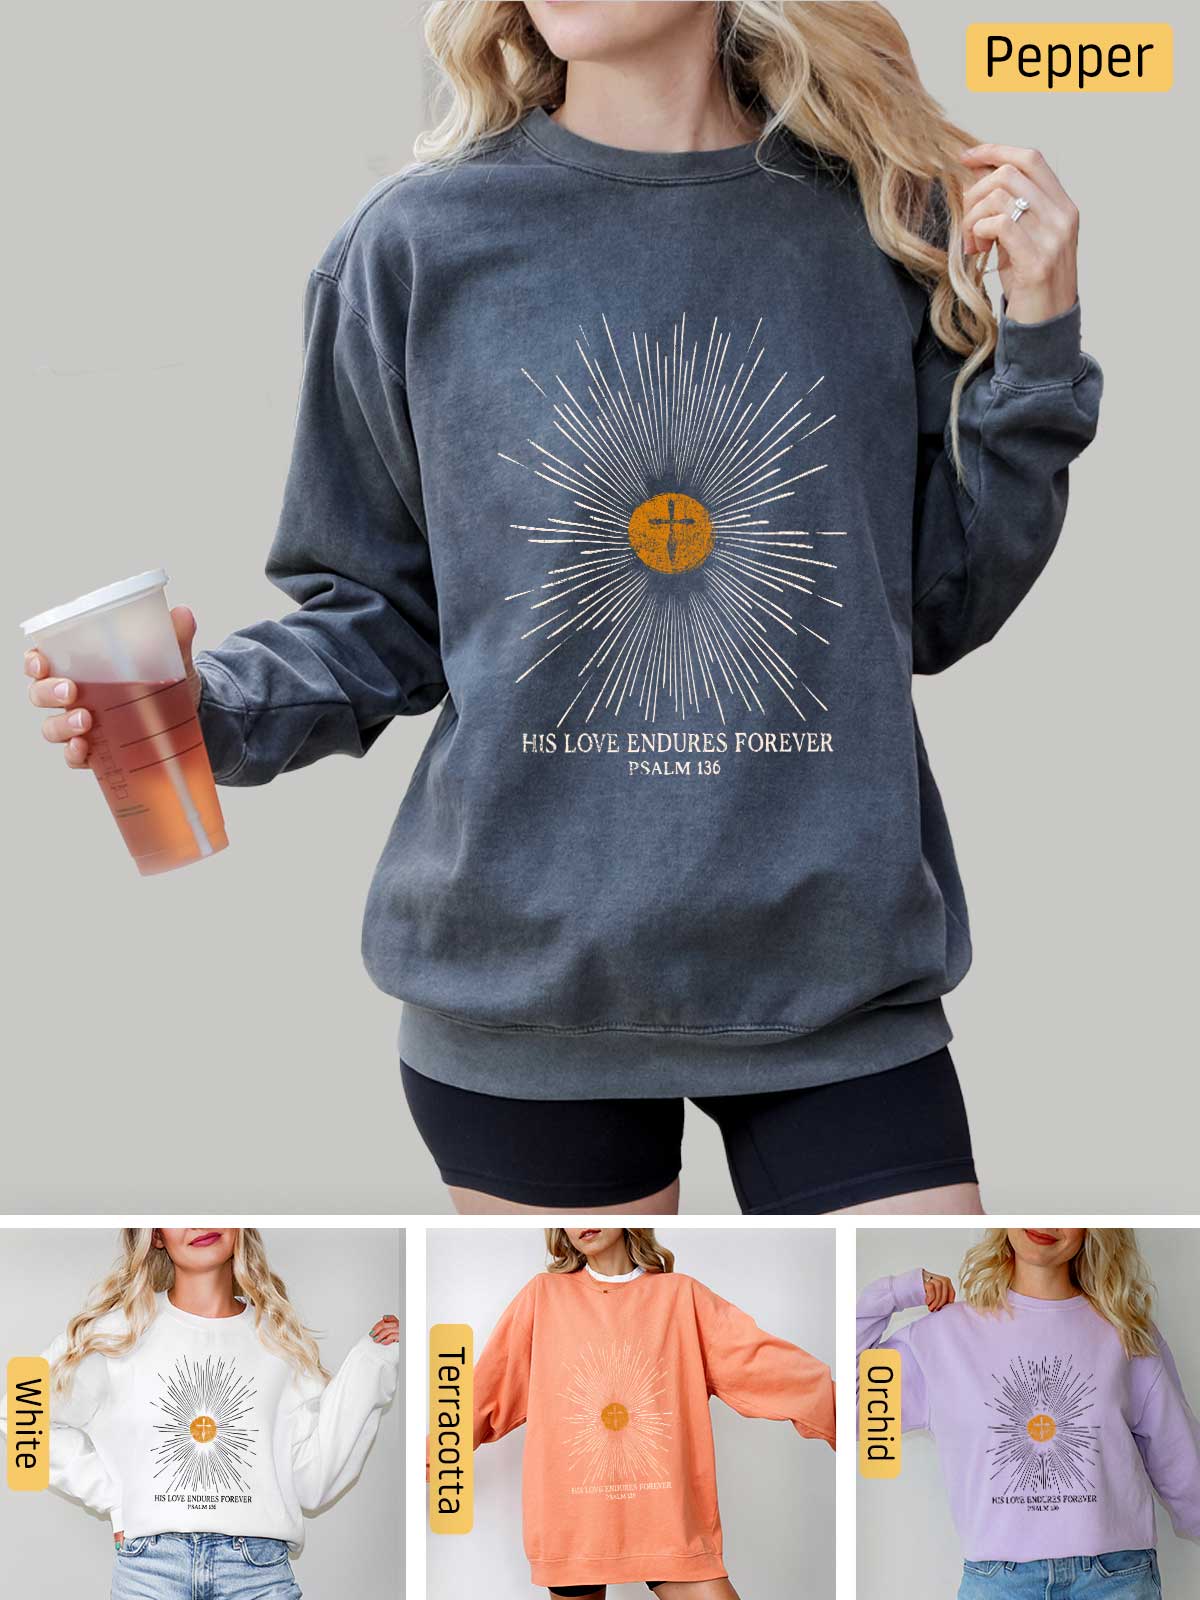 a woman wearing a sweatshirt with a sun graphic on it